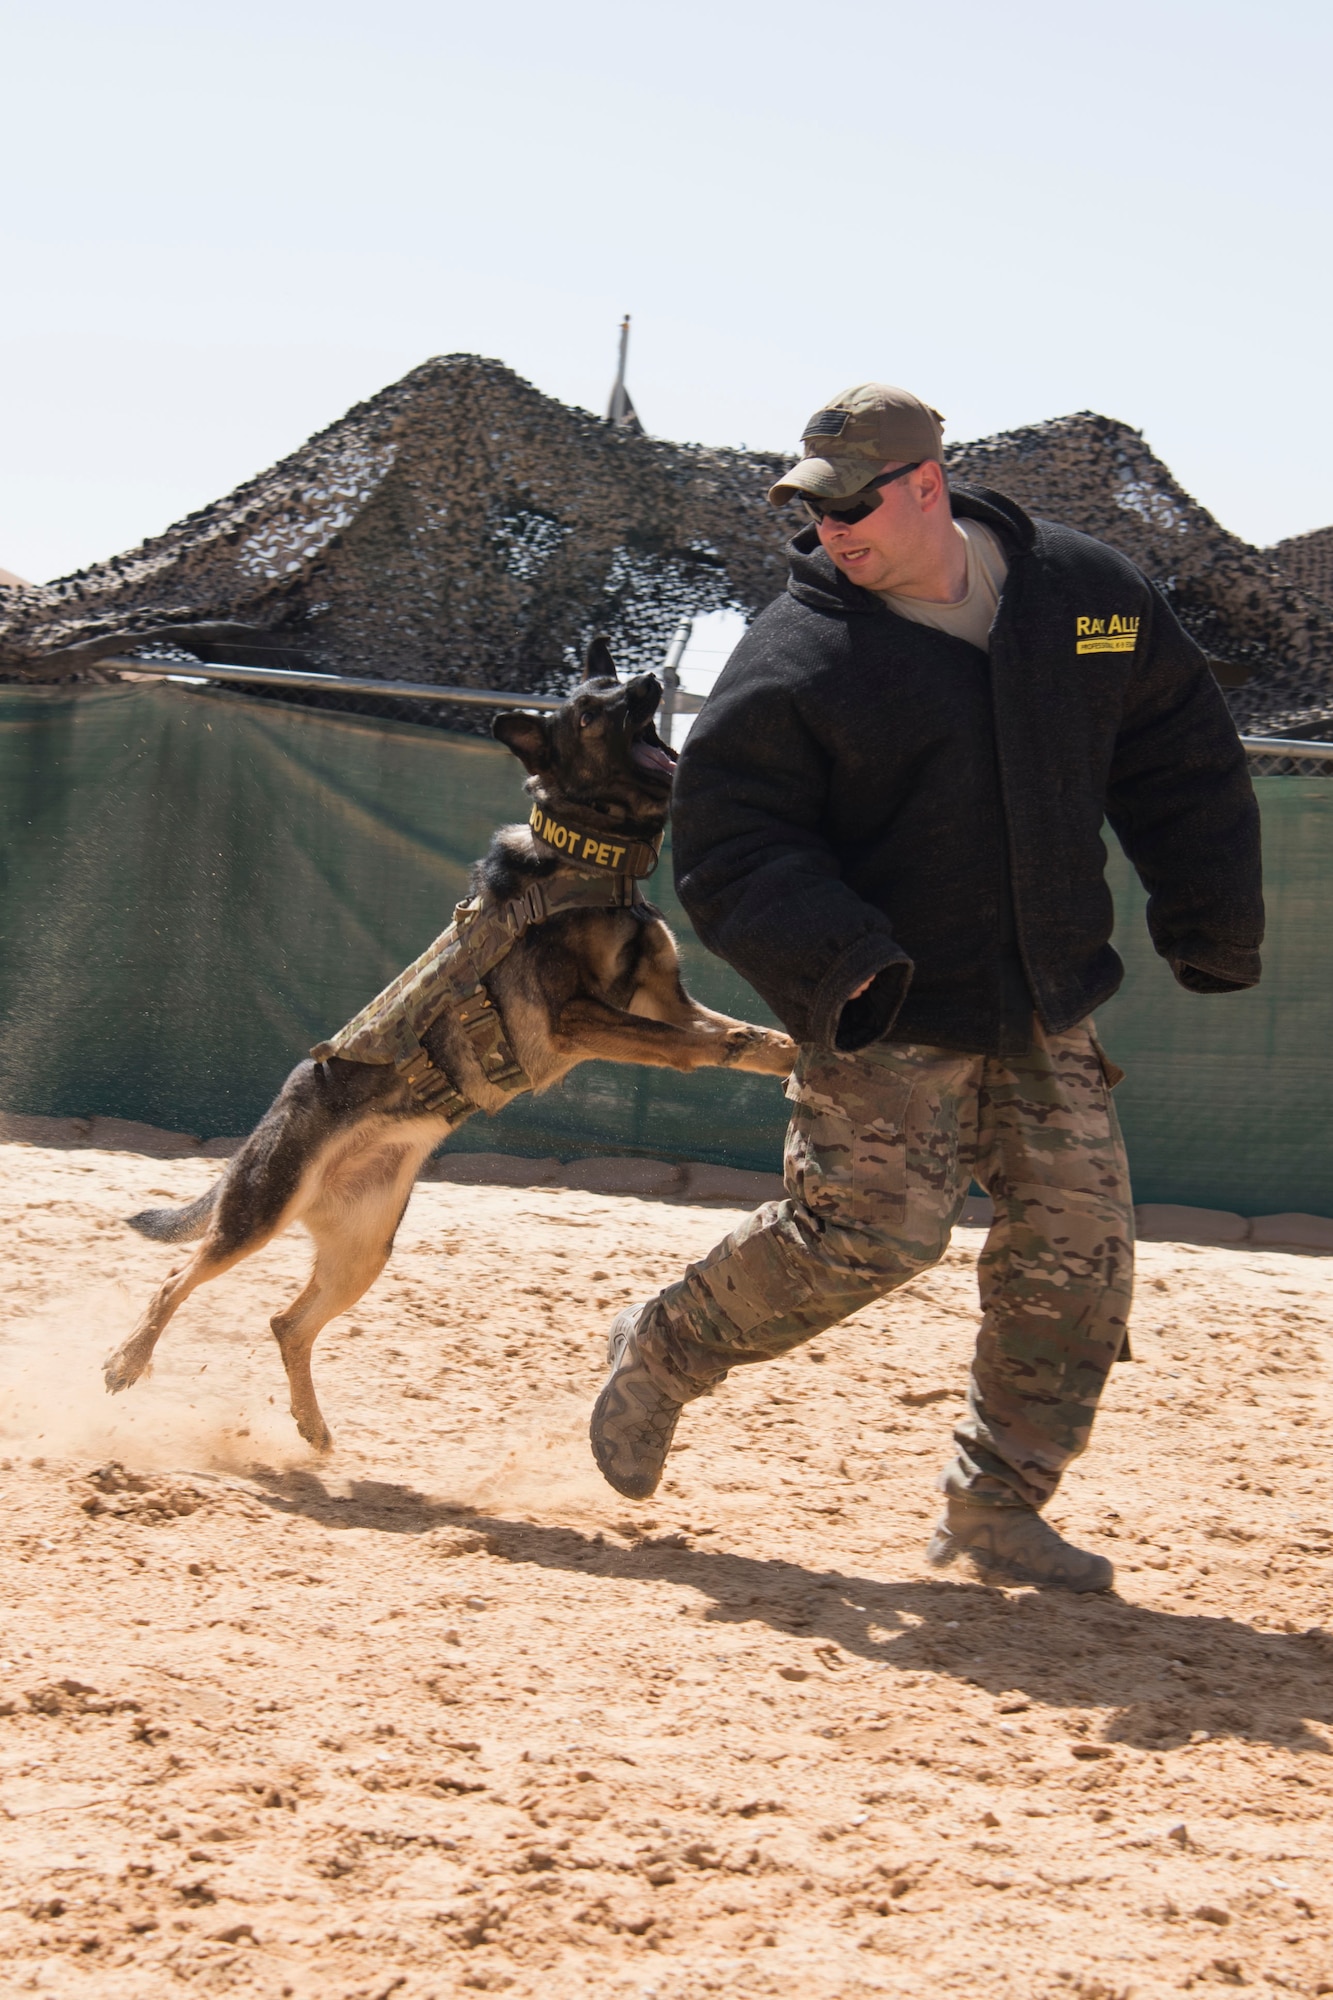 The 332nd Expeditionary Security Forces Squadron hosted a military working dog demonstration May 11, 2018, as part of Police Week at an undisclosed location in Southwest Asia.